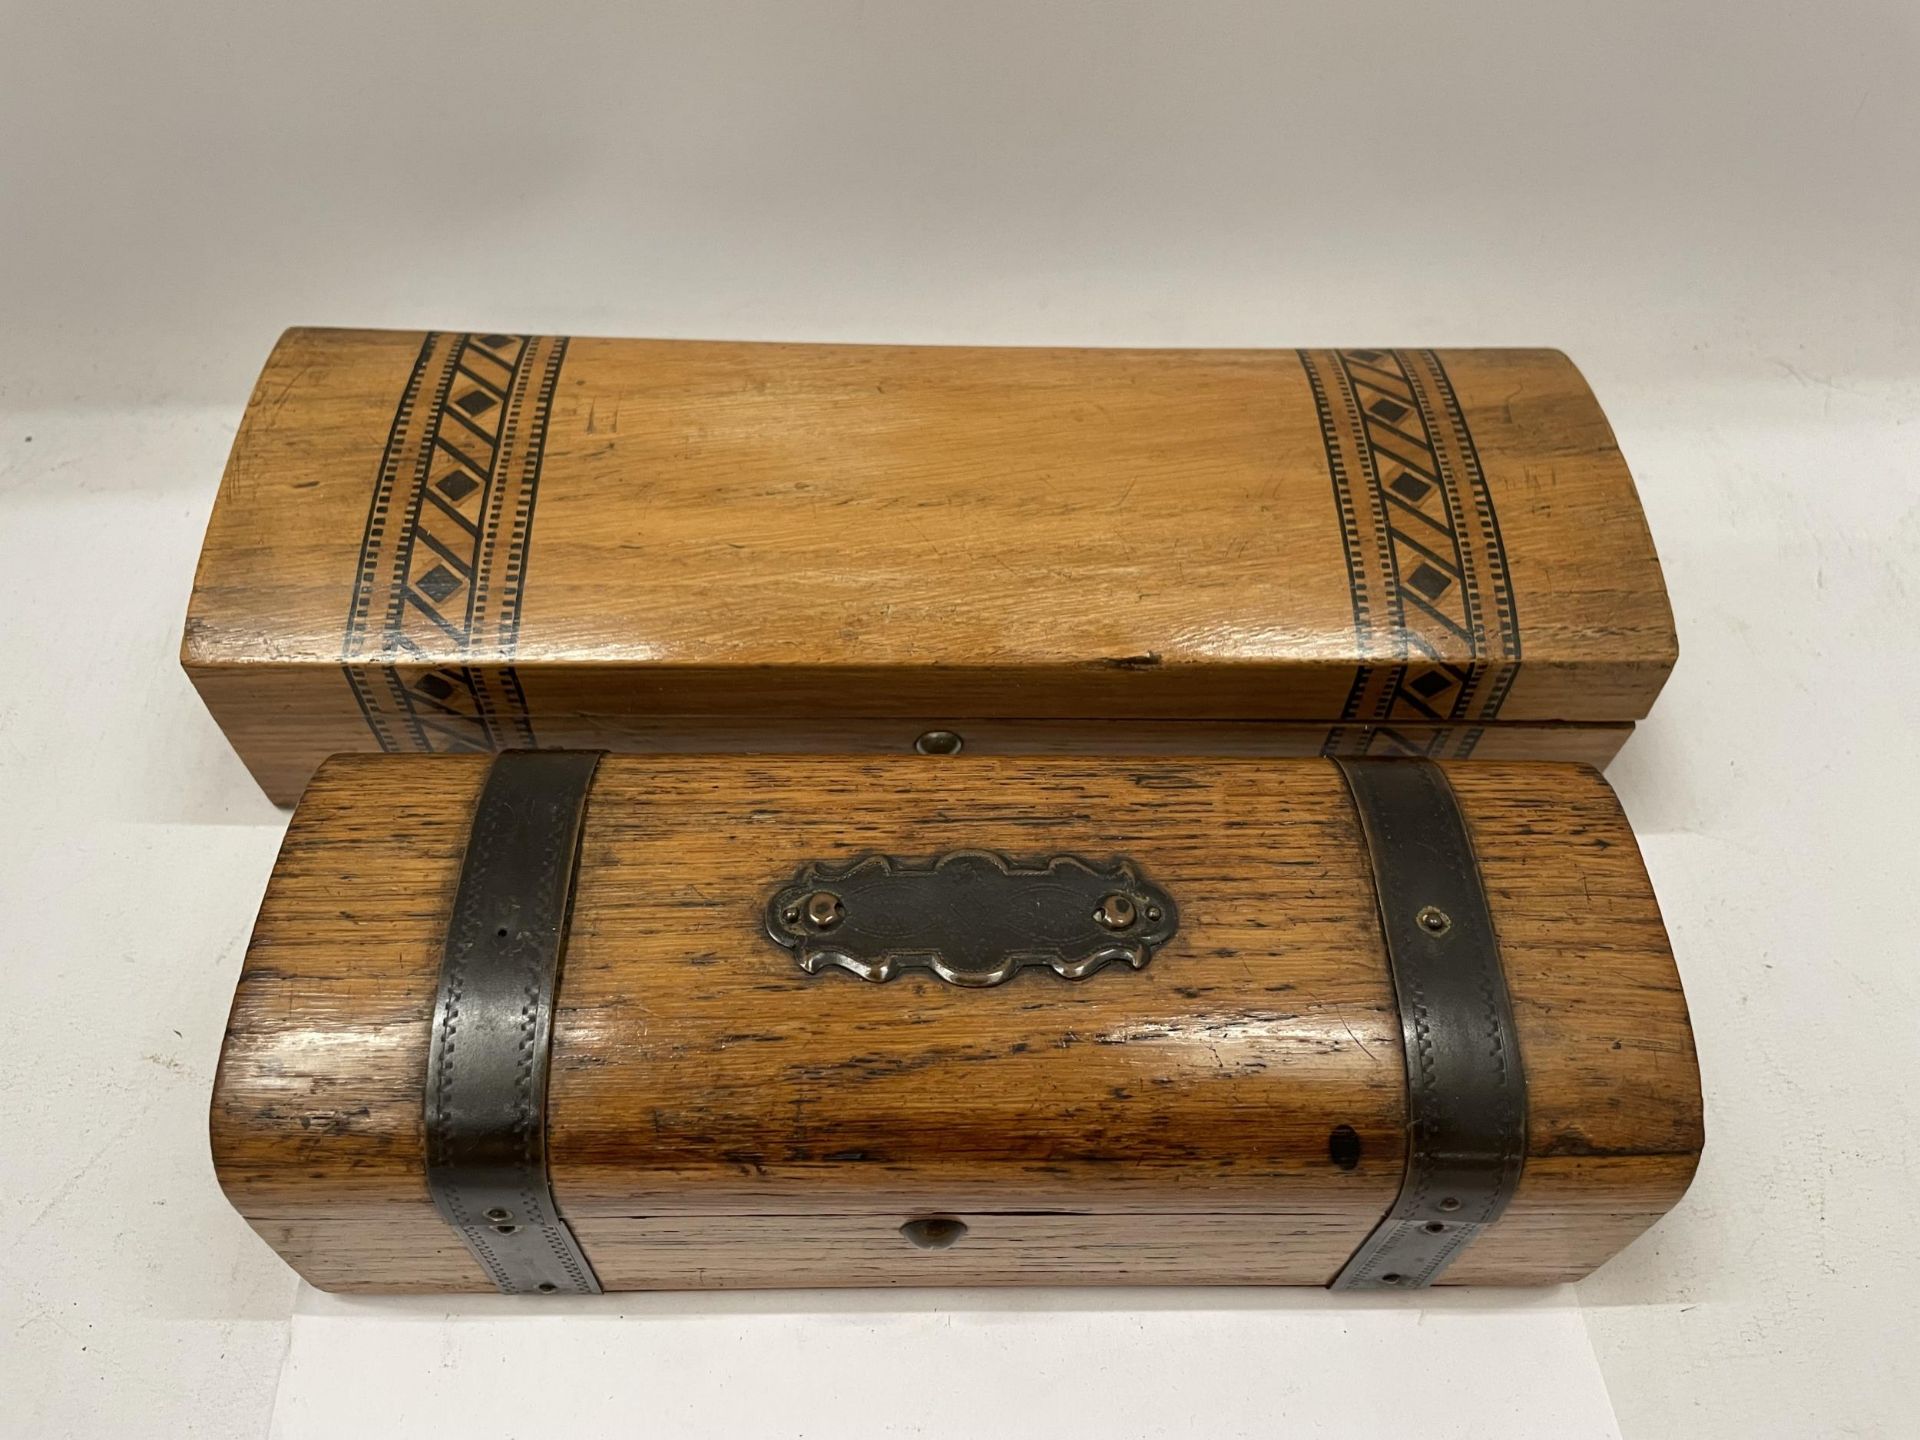 TWO VINTAGE WOODEN GLOVE BOXES - ONE INLAID AND ONE METAL BOUND